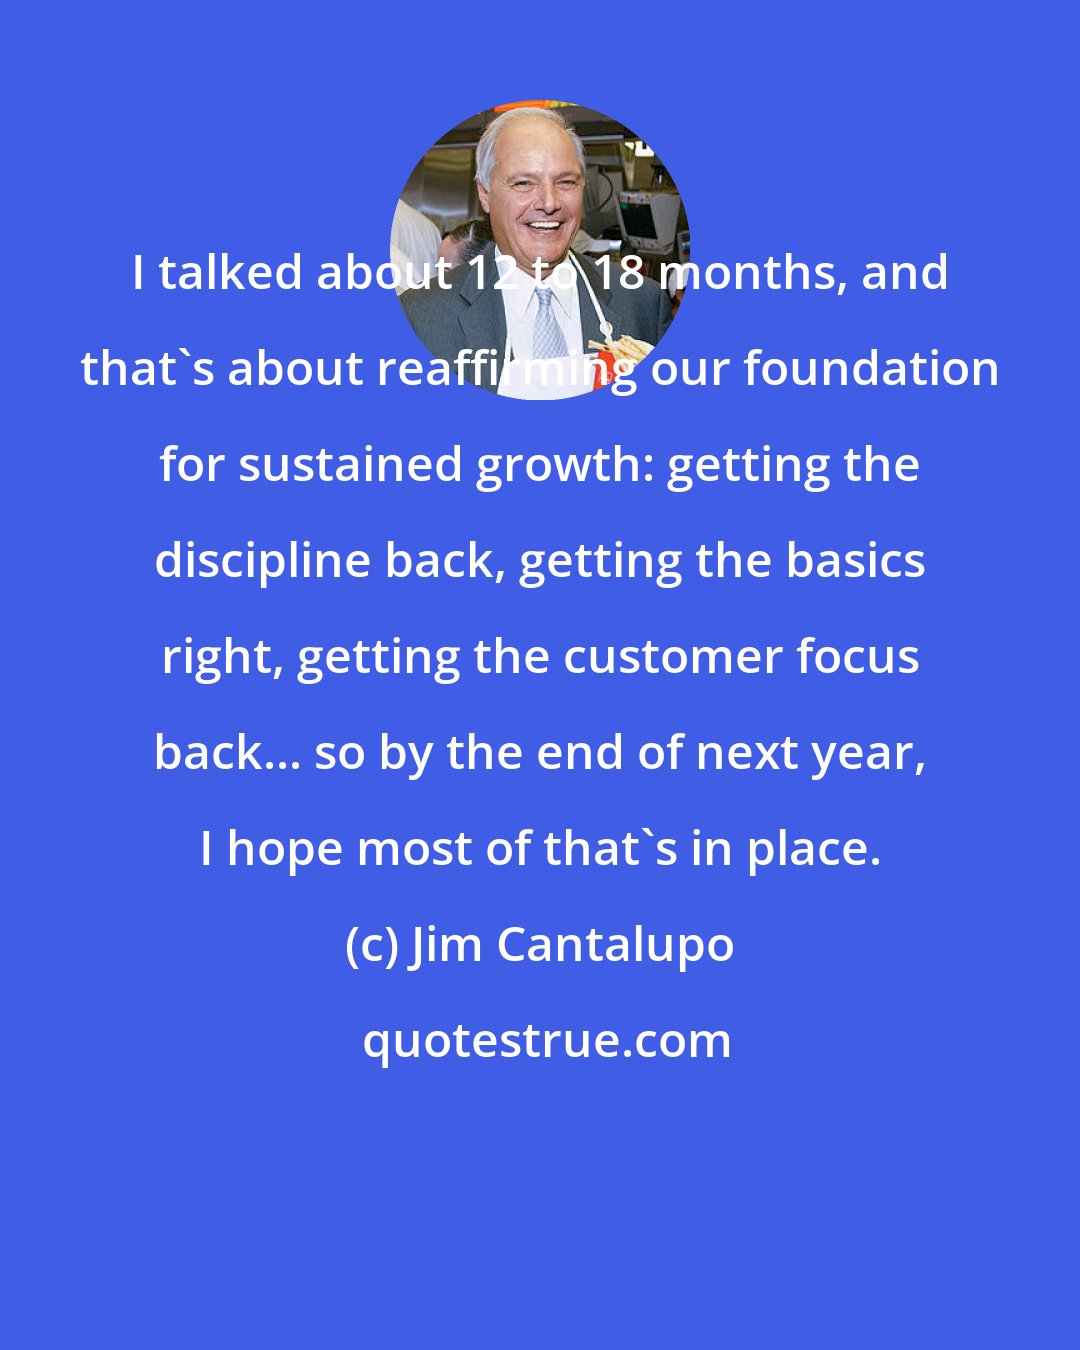 Jim Cantalupo: I talked about 12 to 18 months, and that's about reaffirming our foundation for sustained growth: getting the discipline back, getting the basics right, getting the customer focus back... so by the end of next year, I hope most of that's in place.